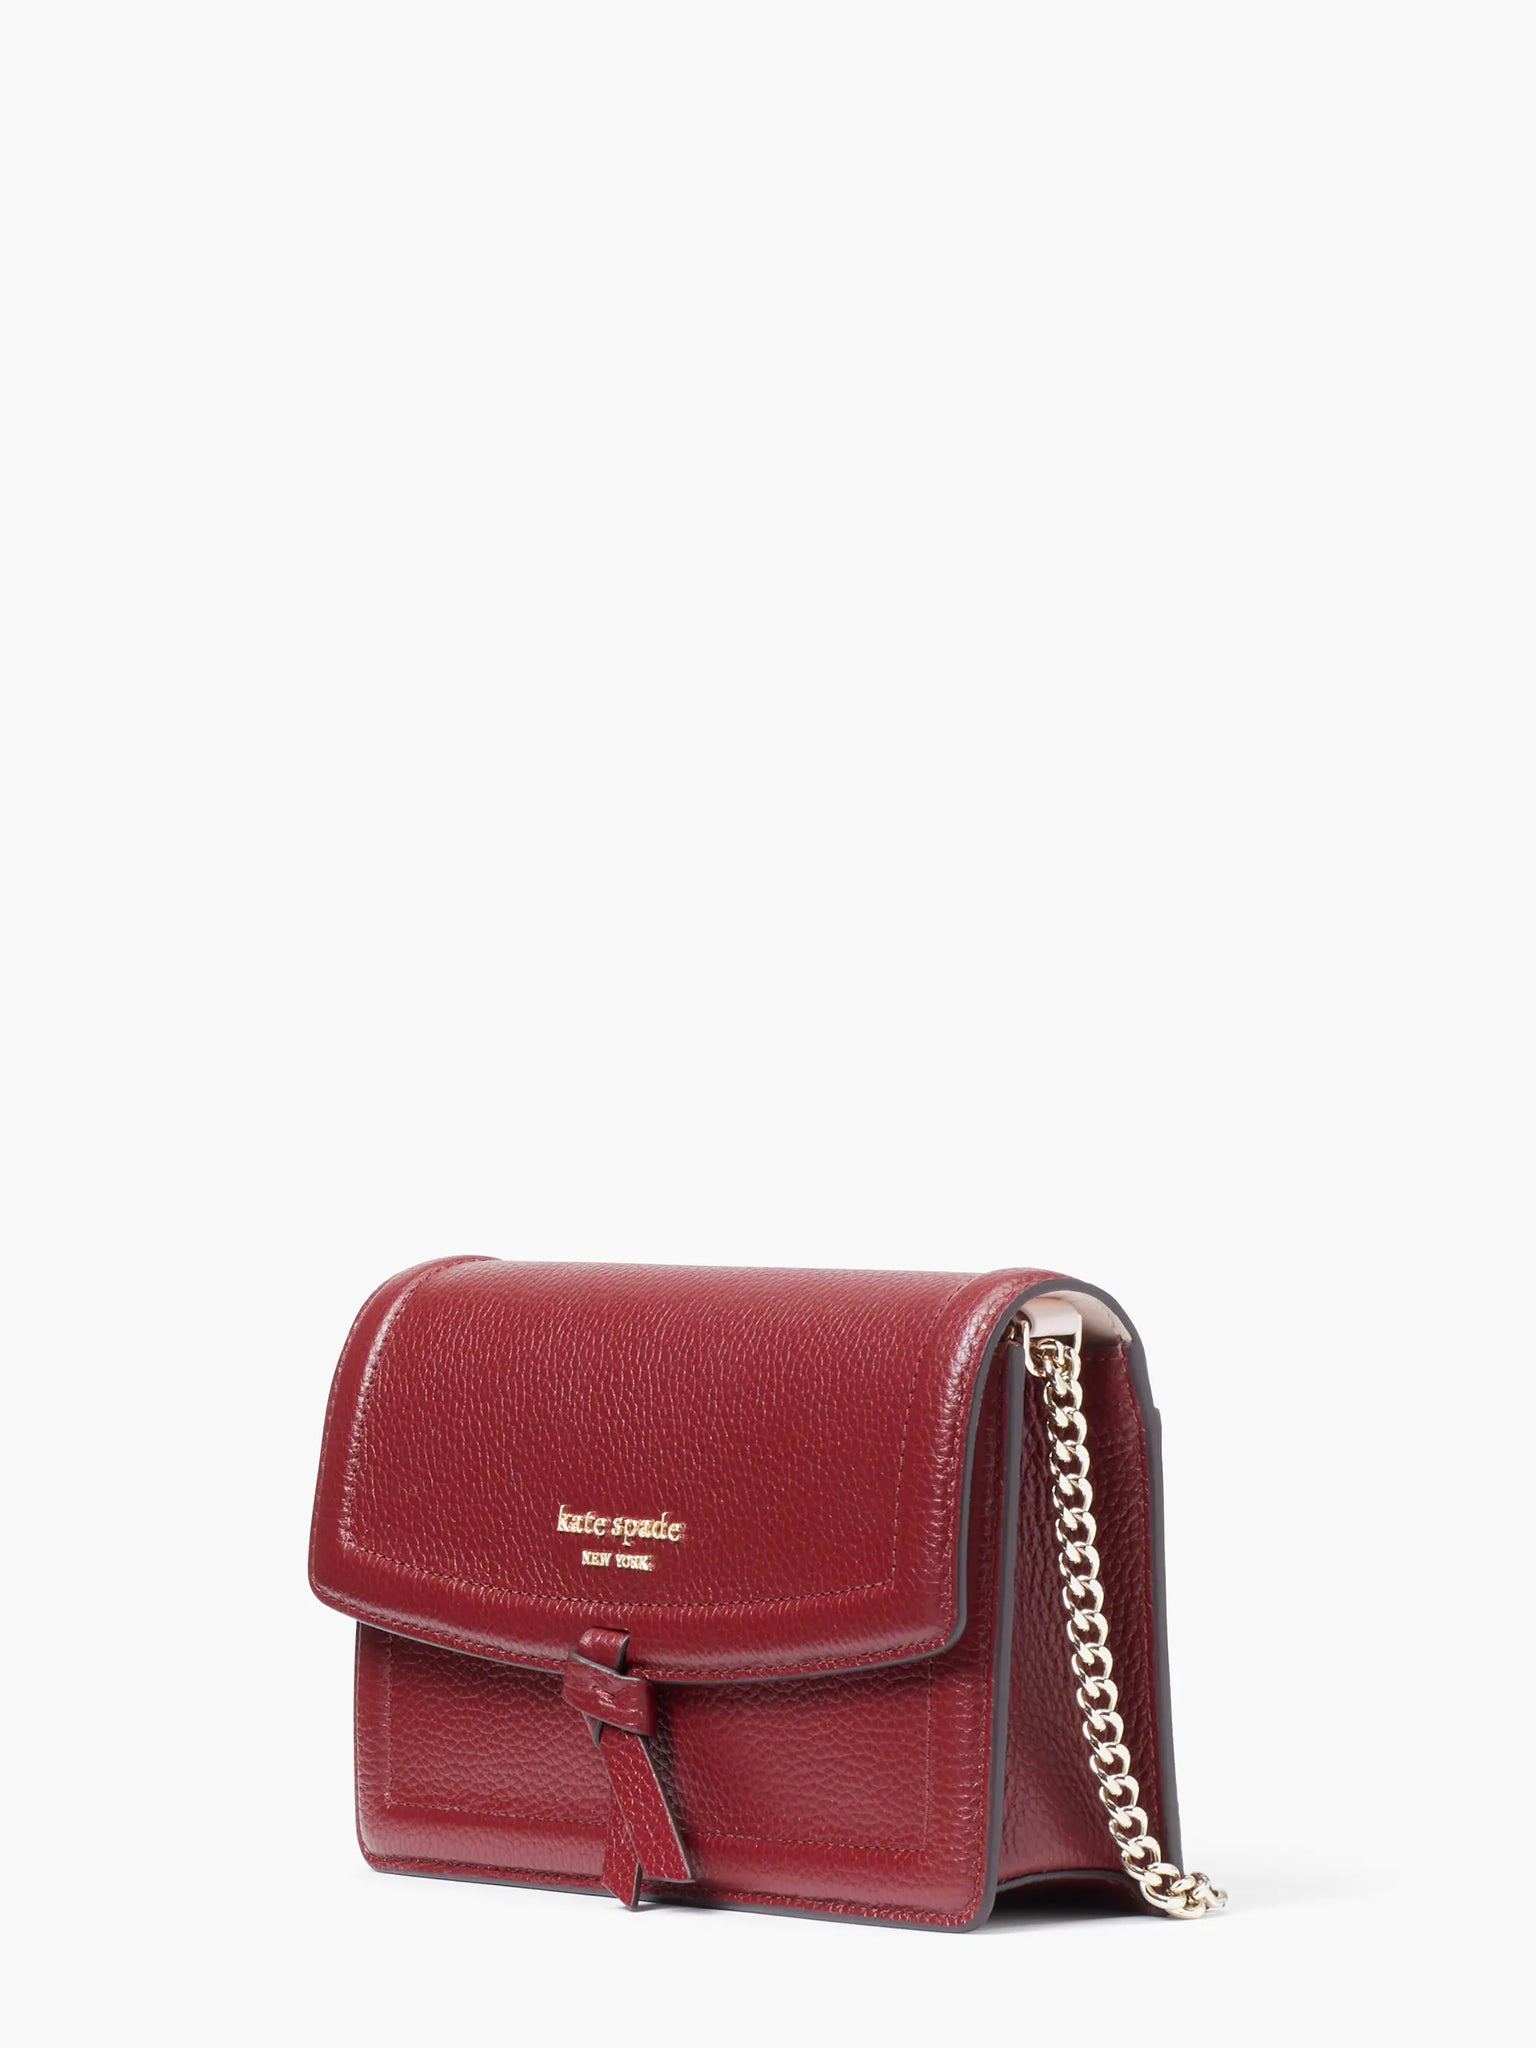 Kate Spade New York Knott Pebbled Leather Flap Crossbody - Autumnal Red